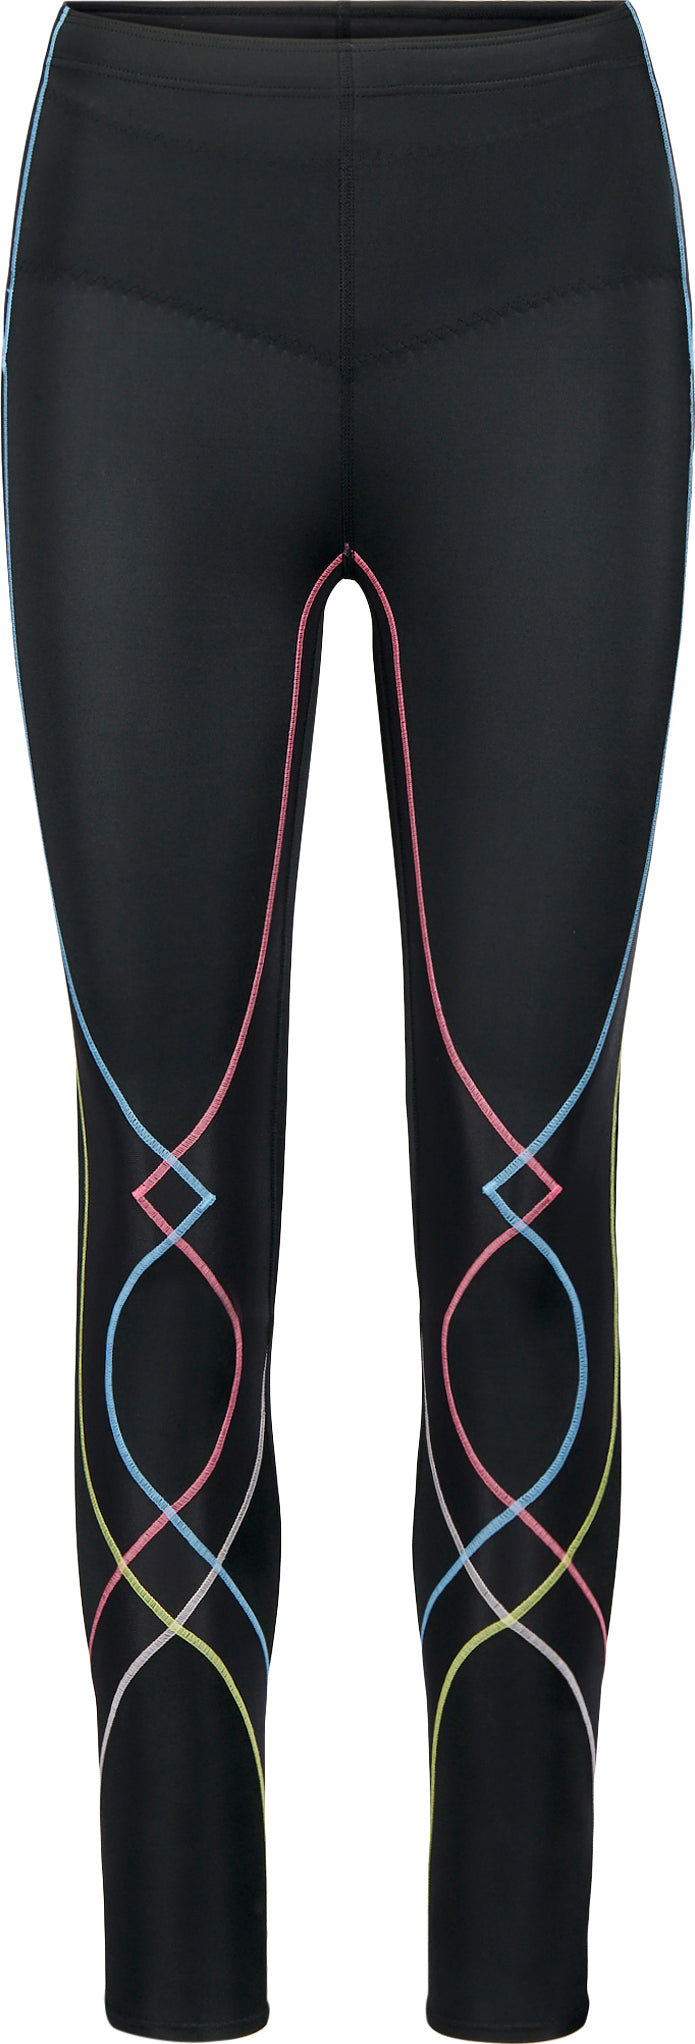 CW-X STABILYX JOINT SUPPORT COMPRESSION TIGHTS, Women's Fashion